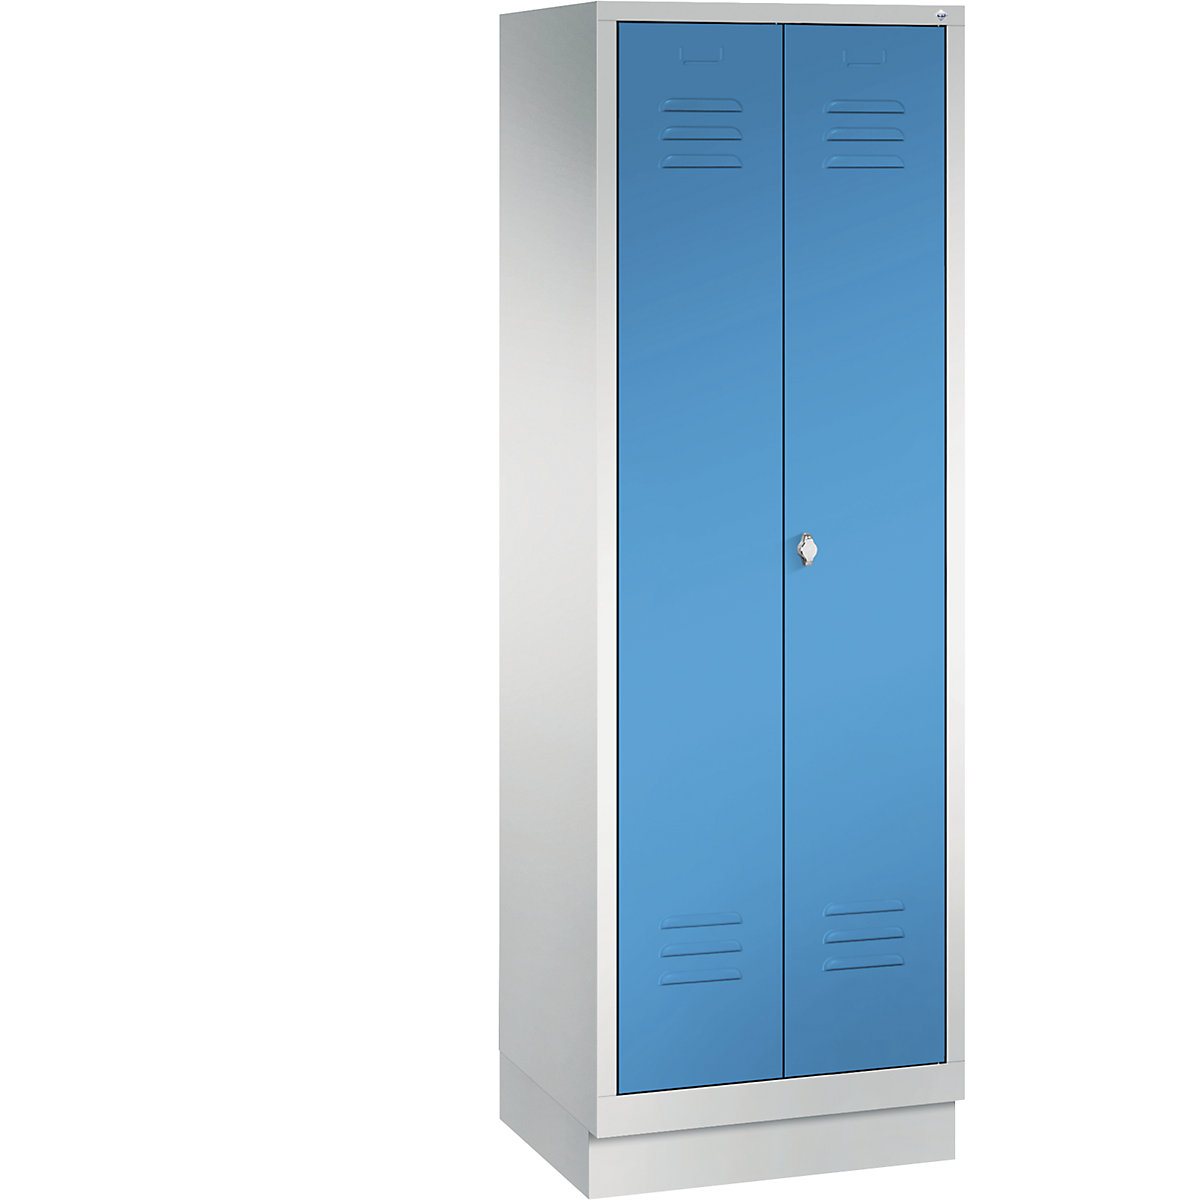 CLASSIC storage cupboard with plinth, doors close in the middle – C+P, 2 compartments, compartment width 300 mm, light grey / light blue-7